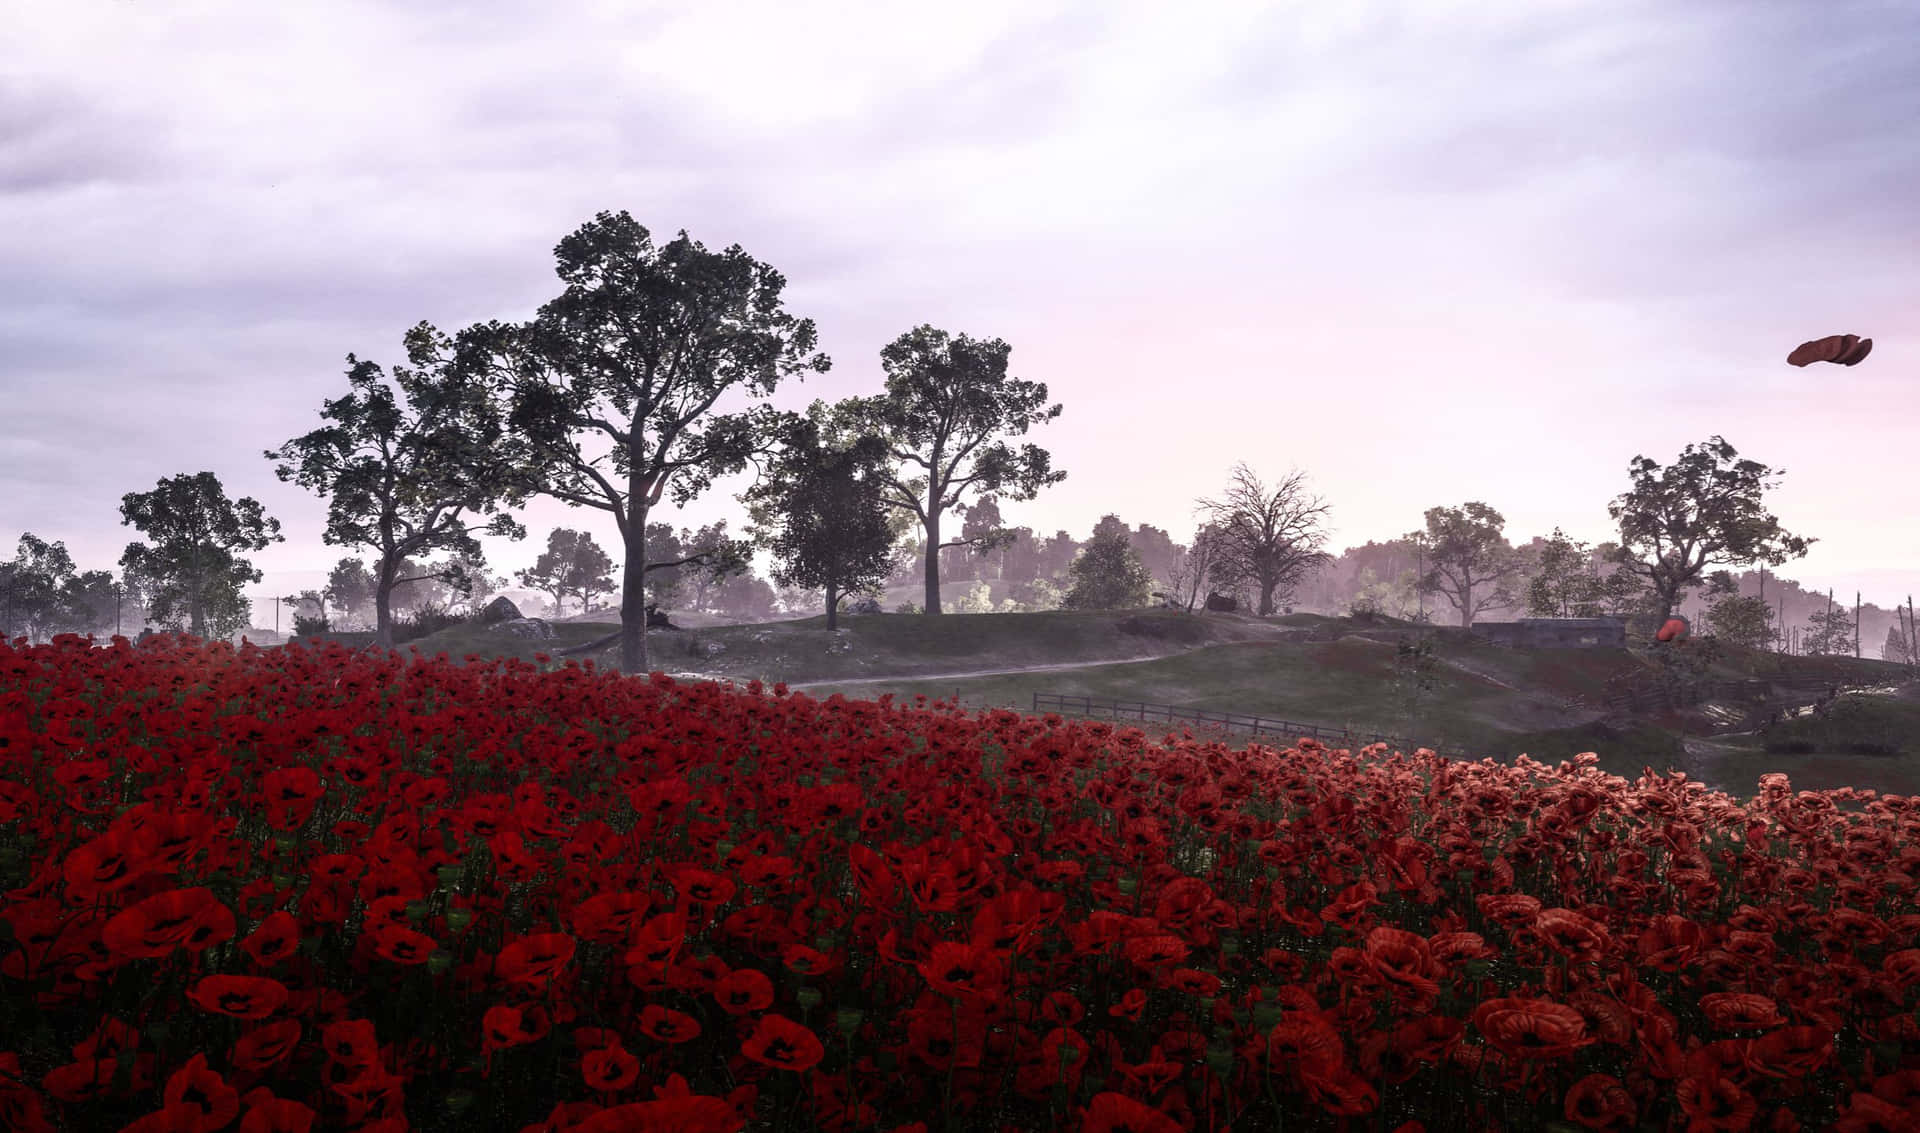 A Red Field With Trees And Poppies